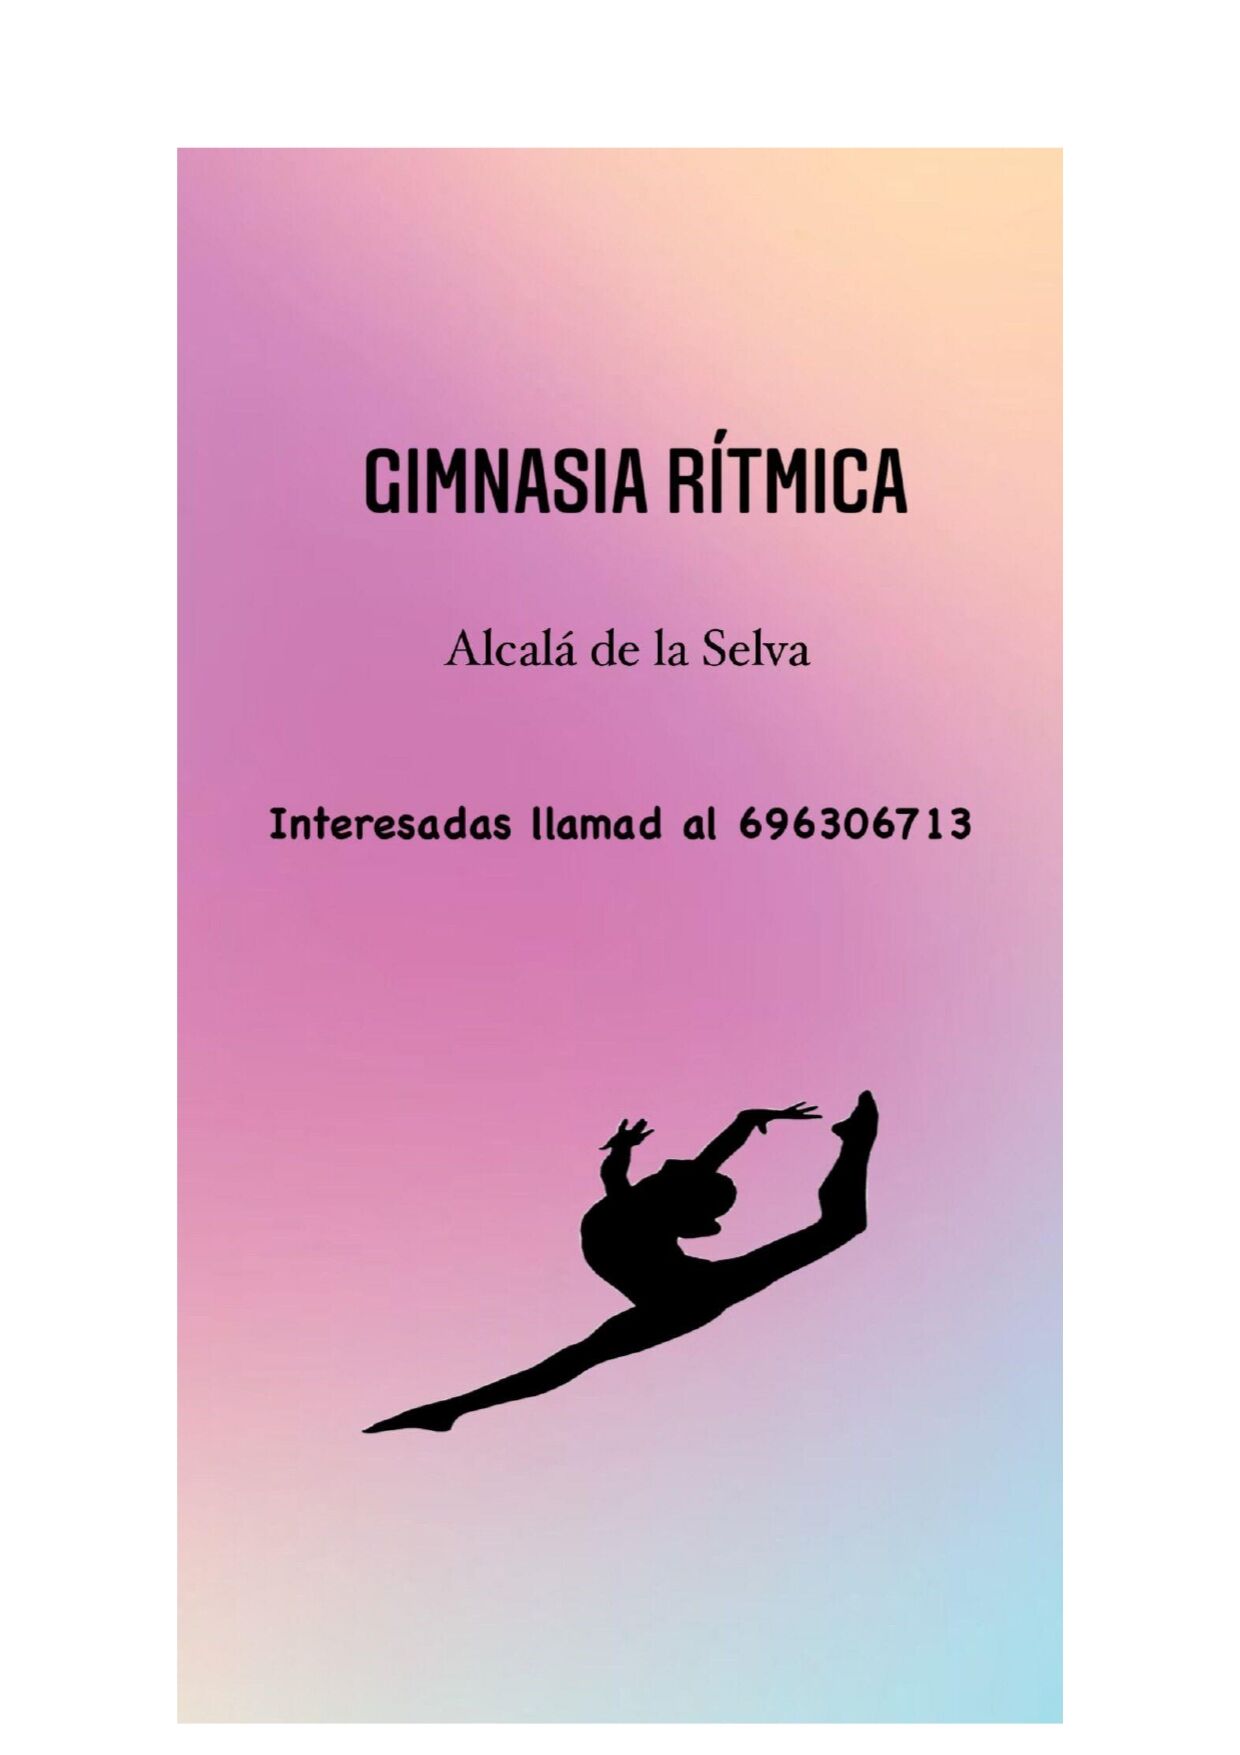 Gimnasiaclases page 0001